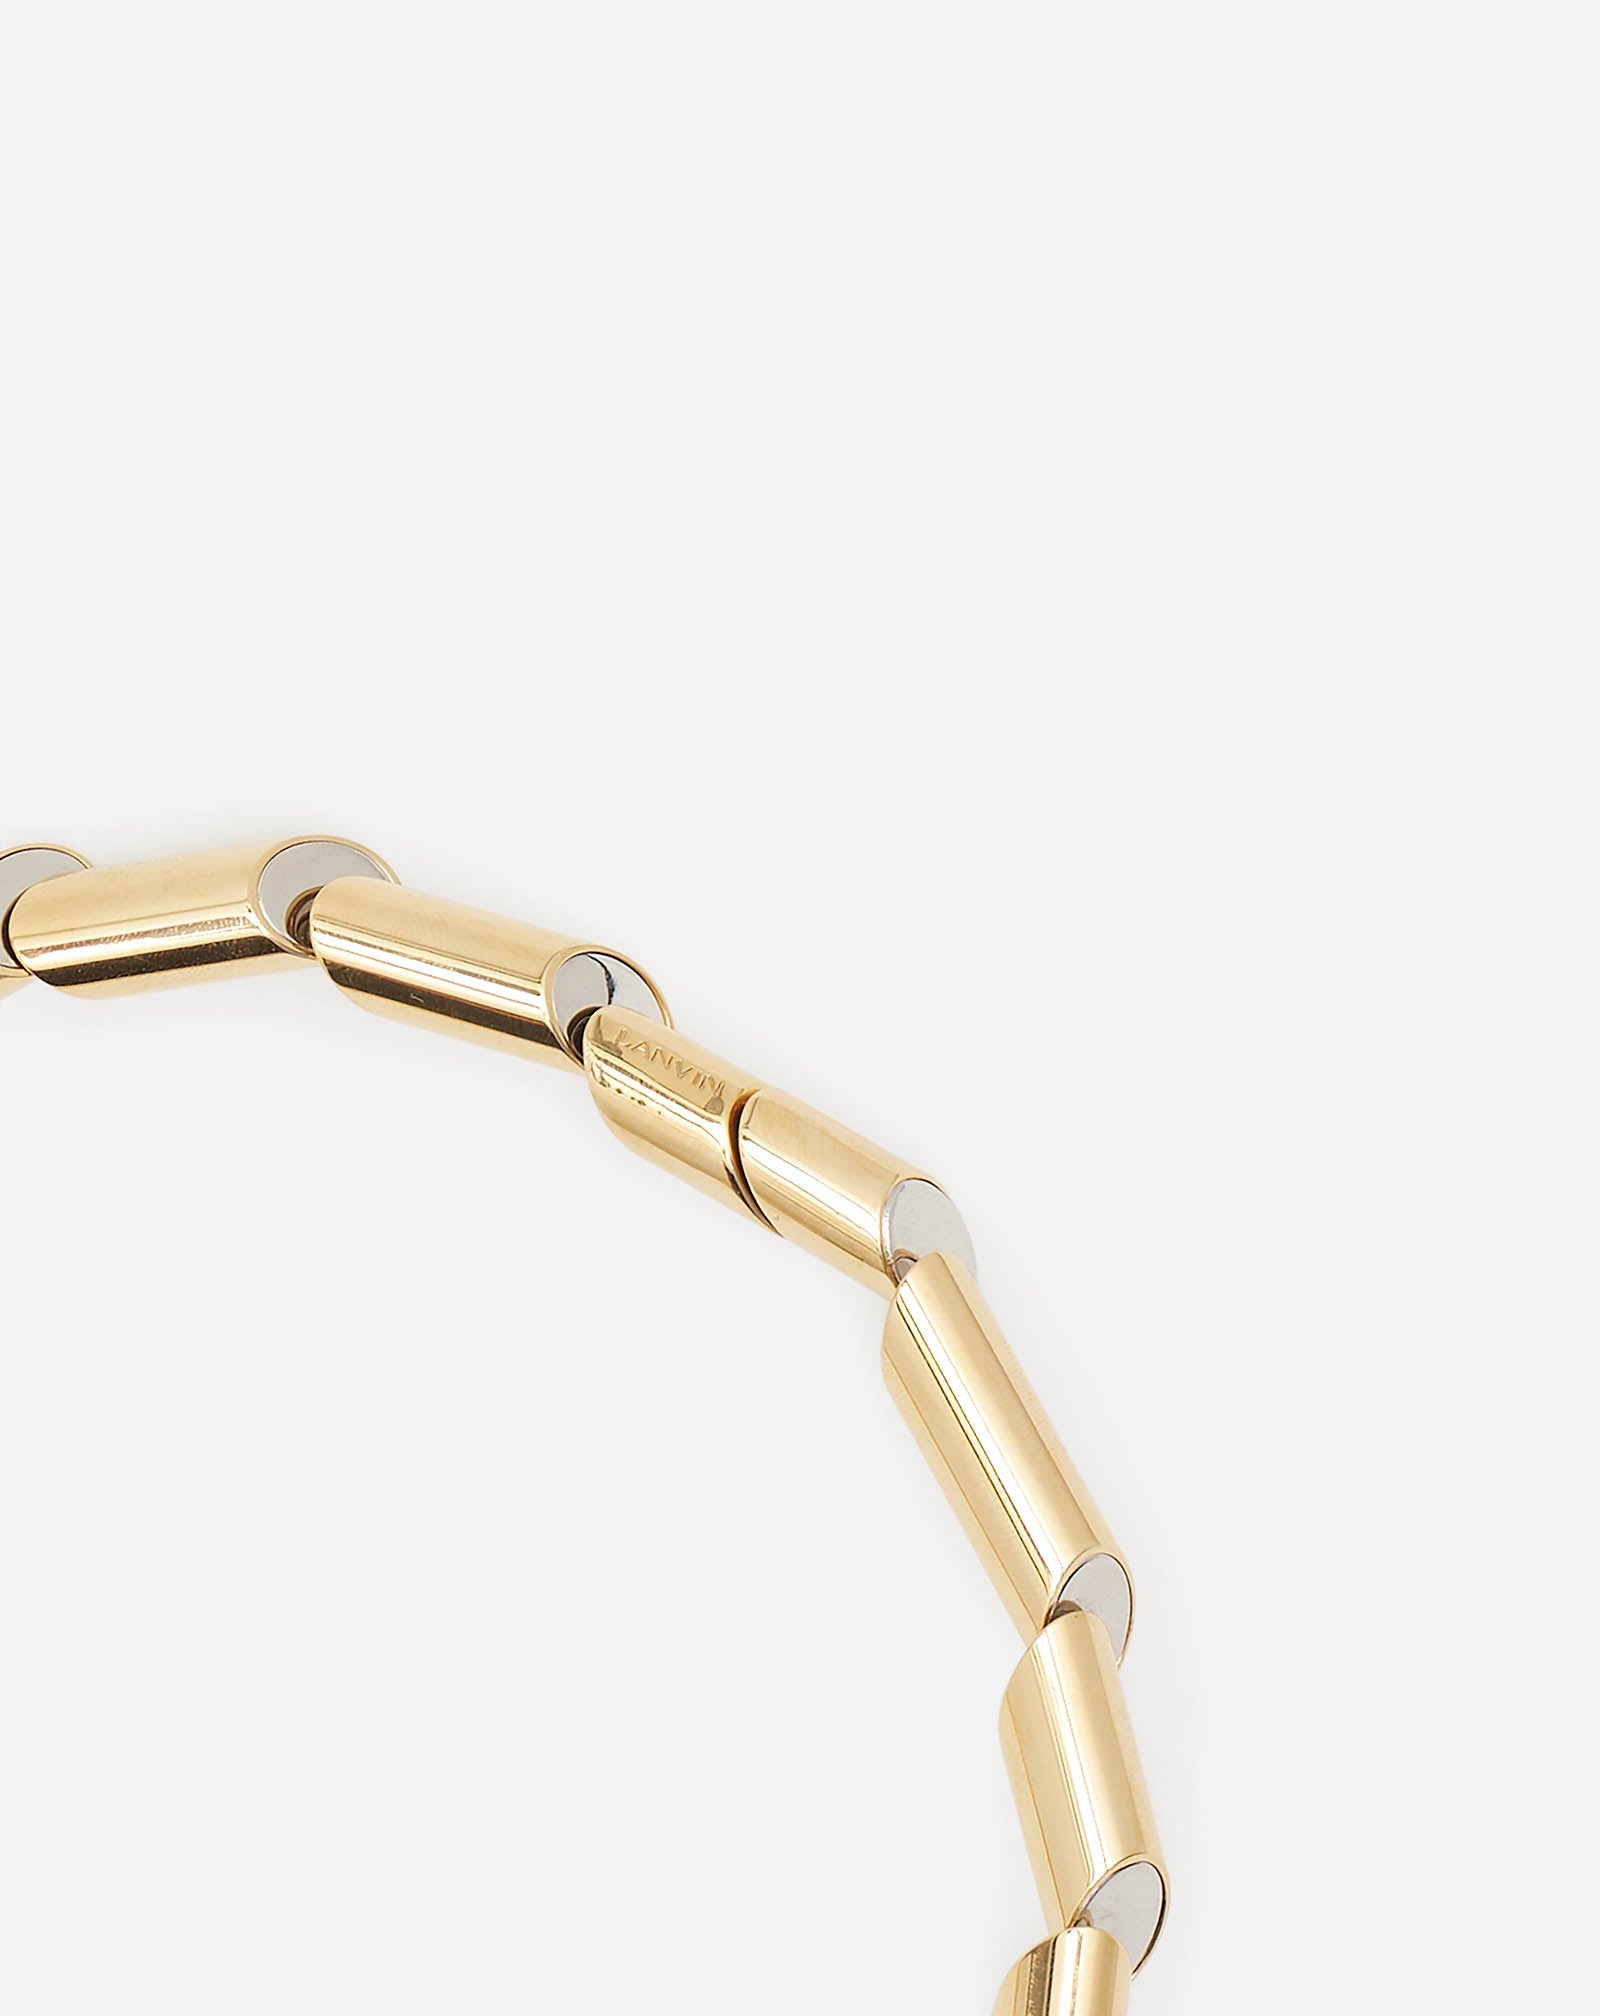 SEQUENCE BY LANVIN CHOKER NECKLACE - 3